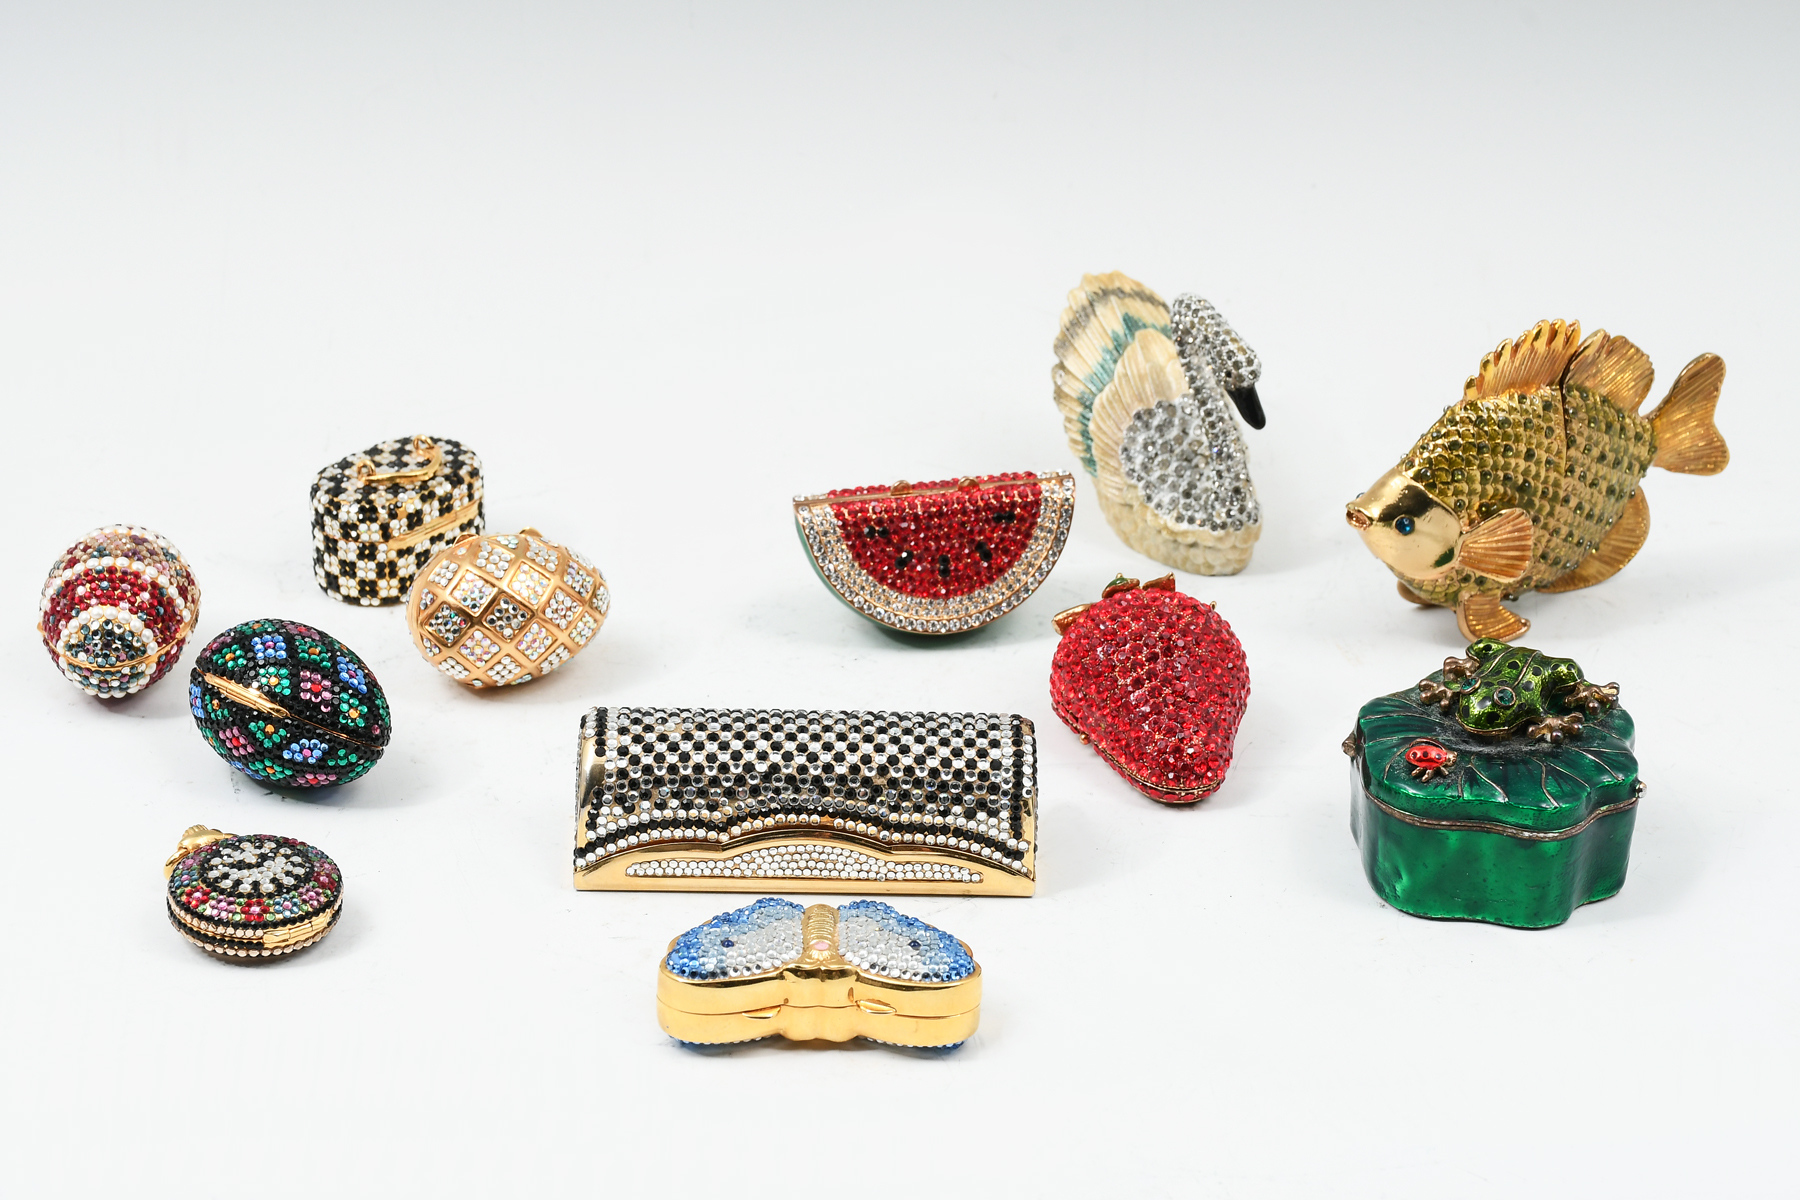 JUDITH LEIBER PILL BOX COLLECTION: Two